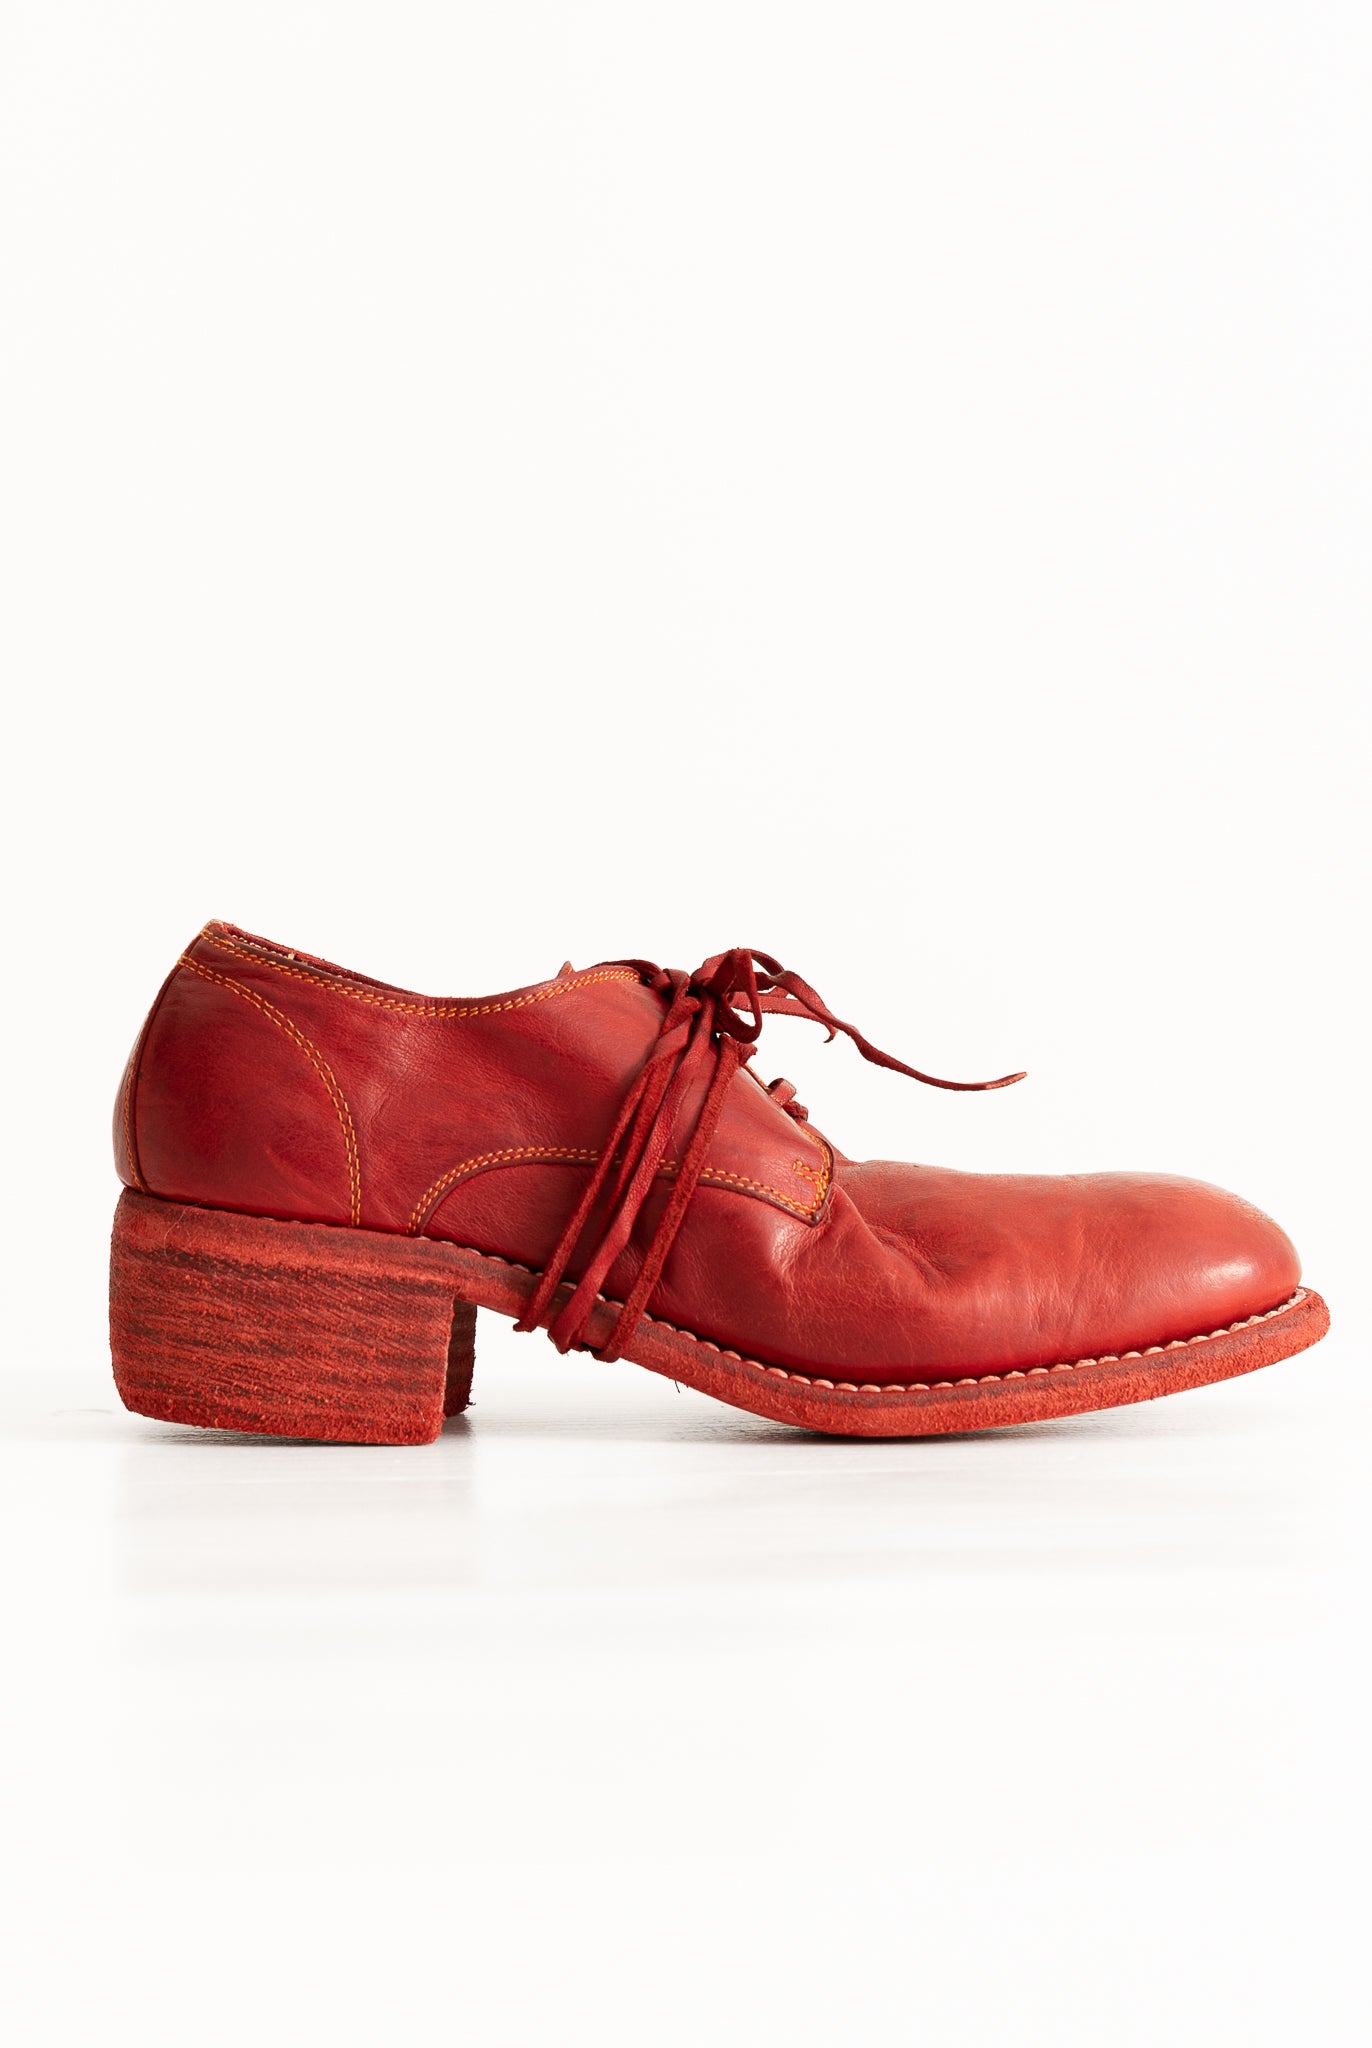 guidi italy red oxford derby shoe